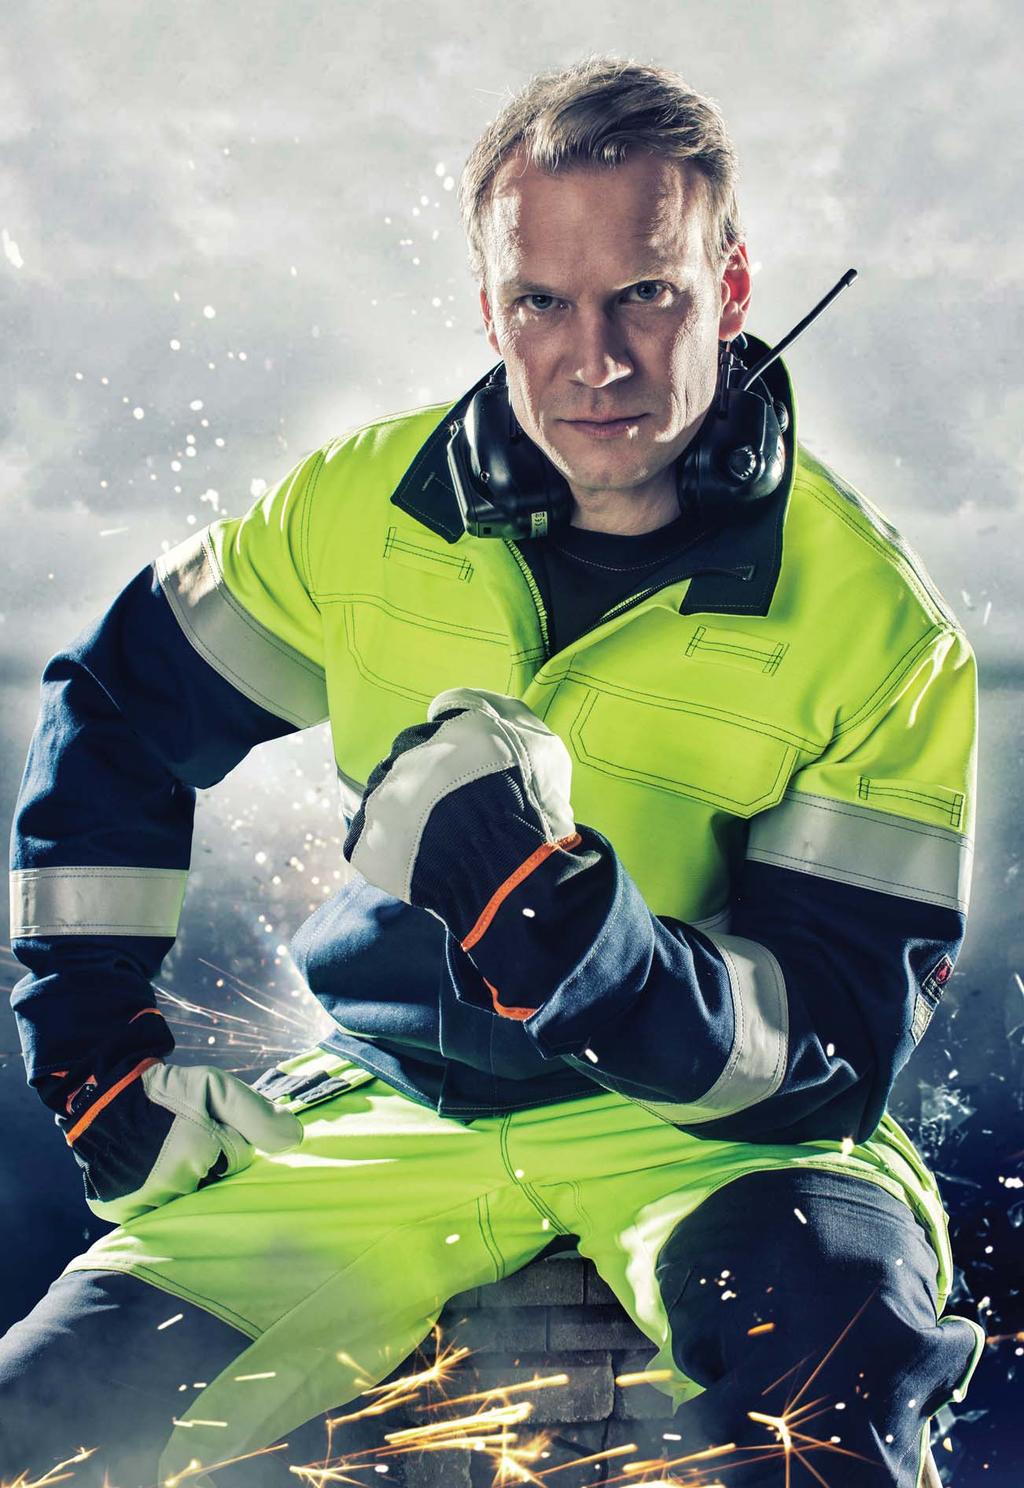 High-visibility flame-resistant Fabric description We have used a canvas-weave fabric for our flame-resistant/high-visibility collection on pages 33-34.